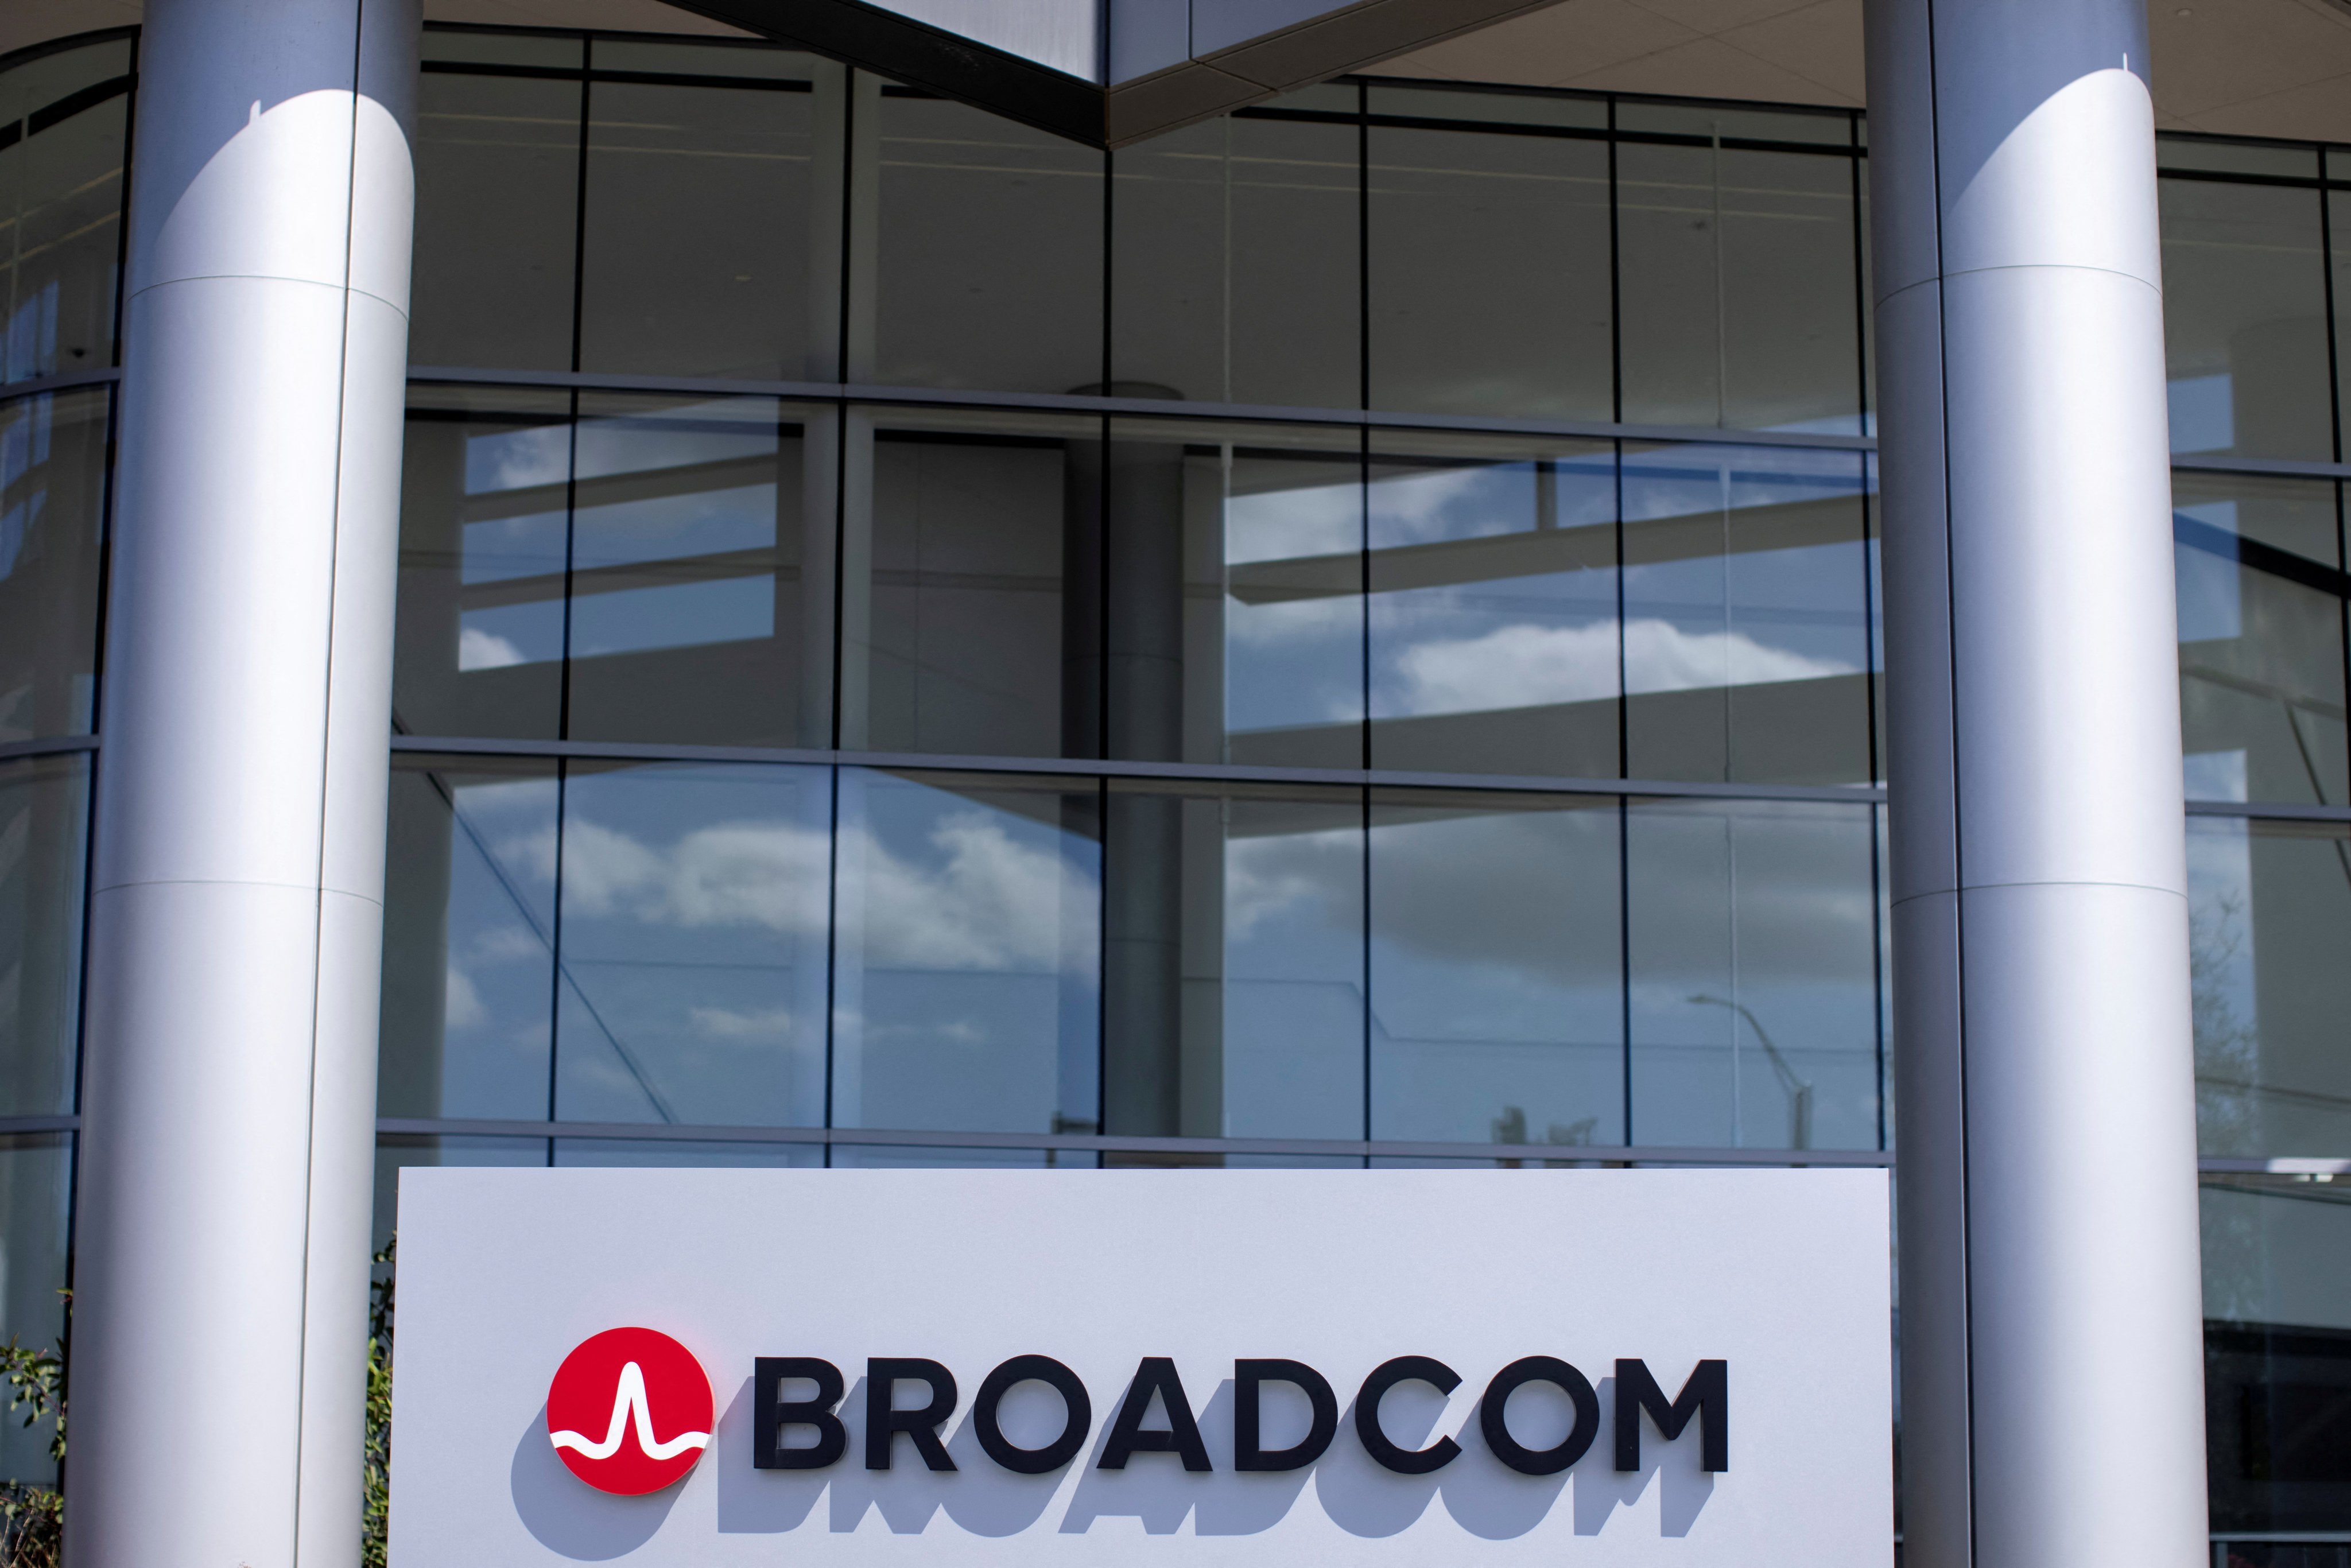 The Broadcom logo is shown outside one of their office complexes in Irvine, California, March 4, 2021. Photo: Reuters